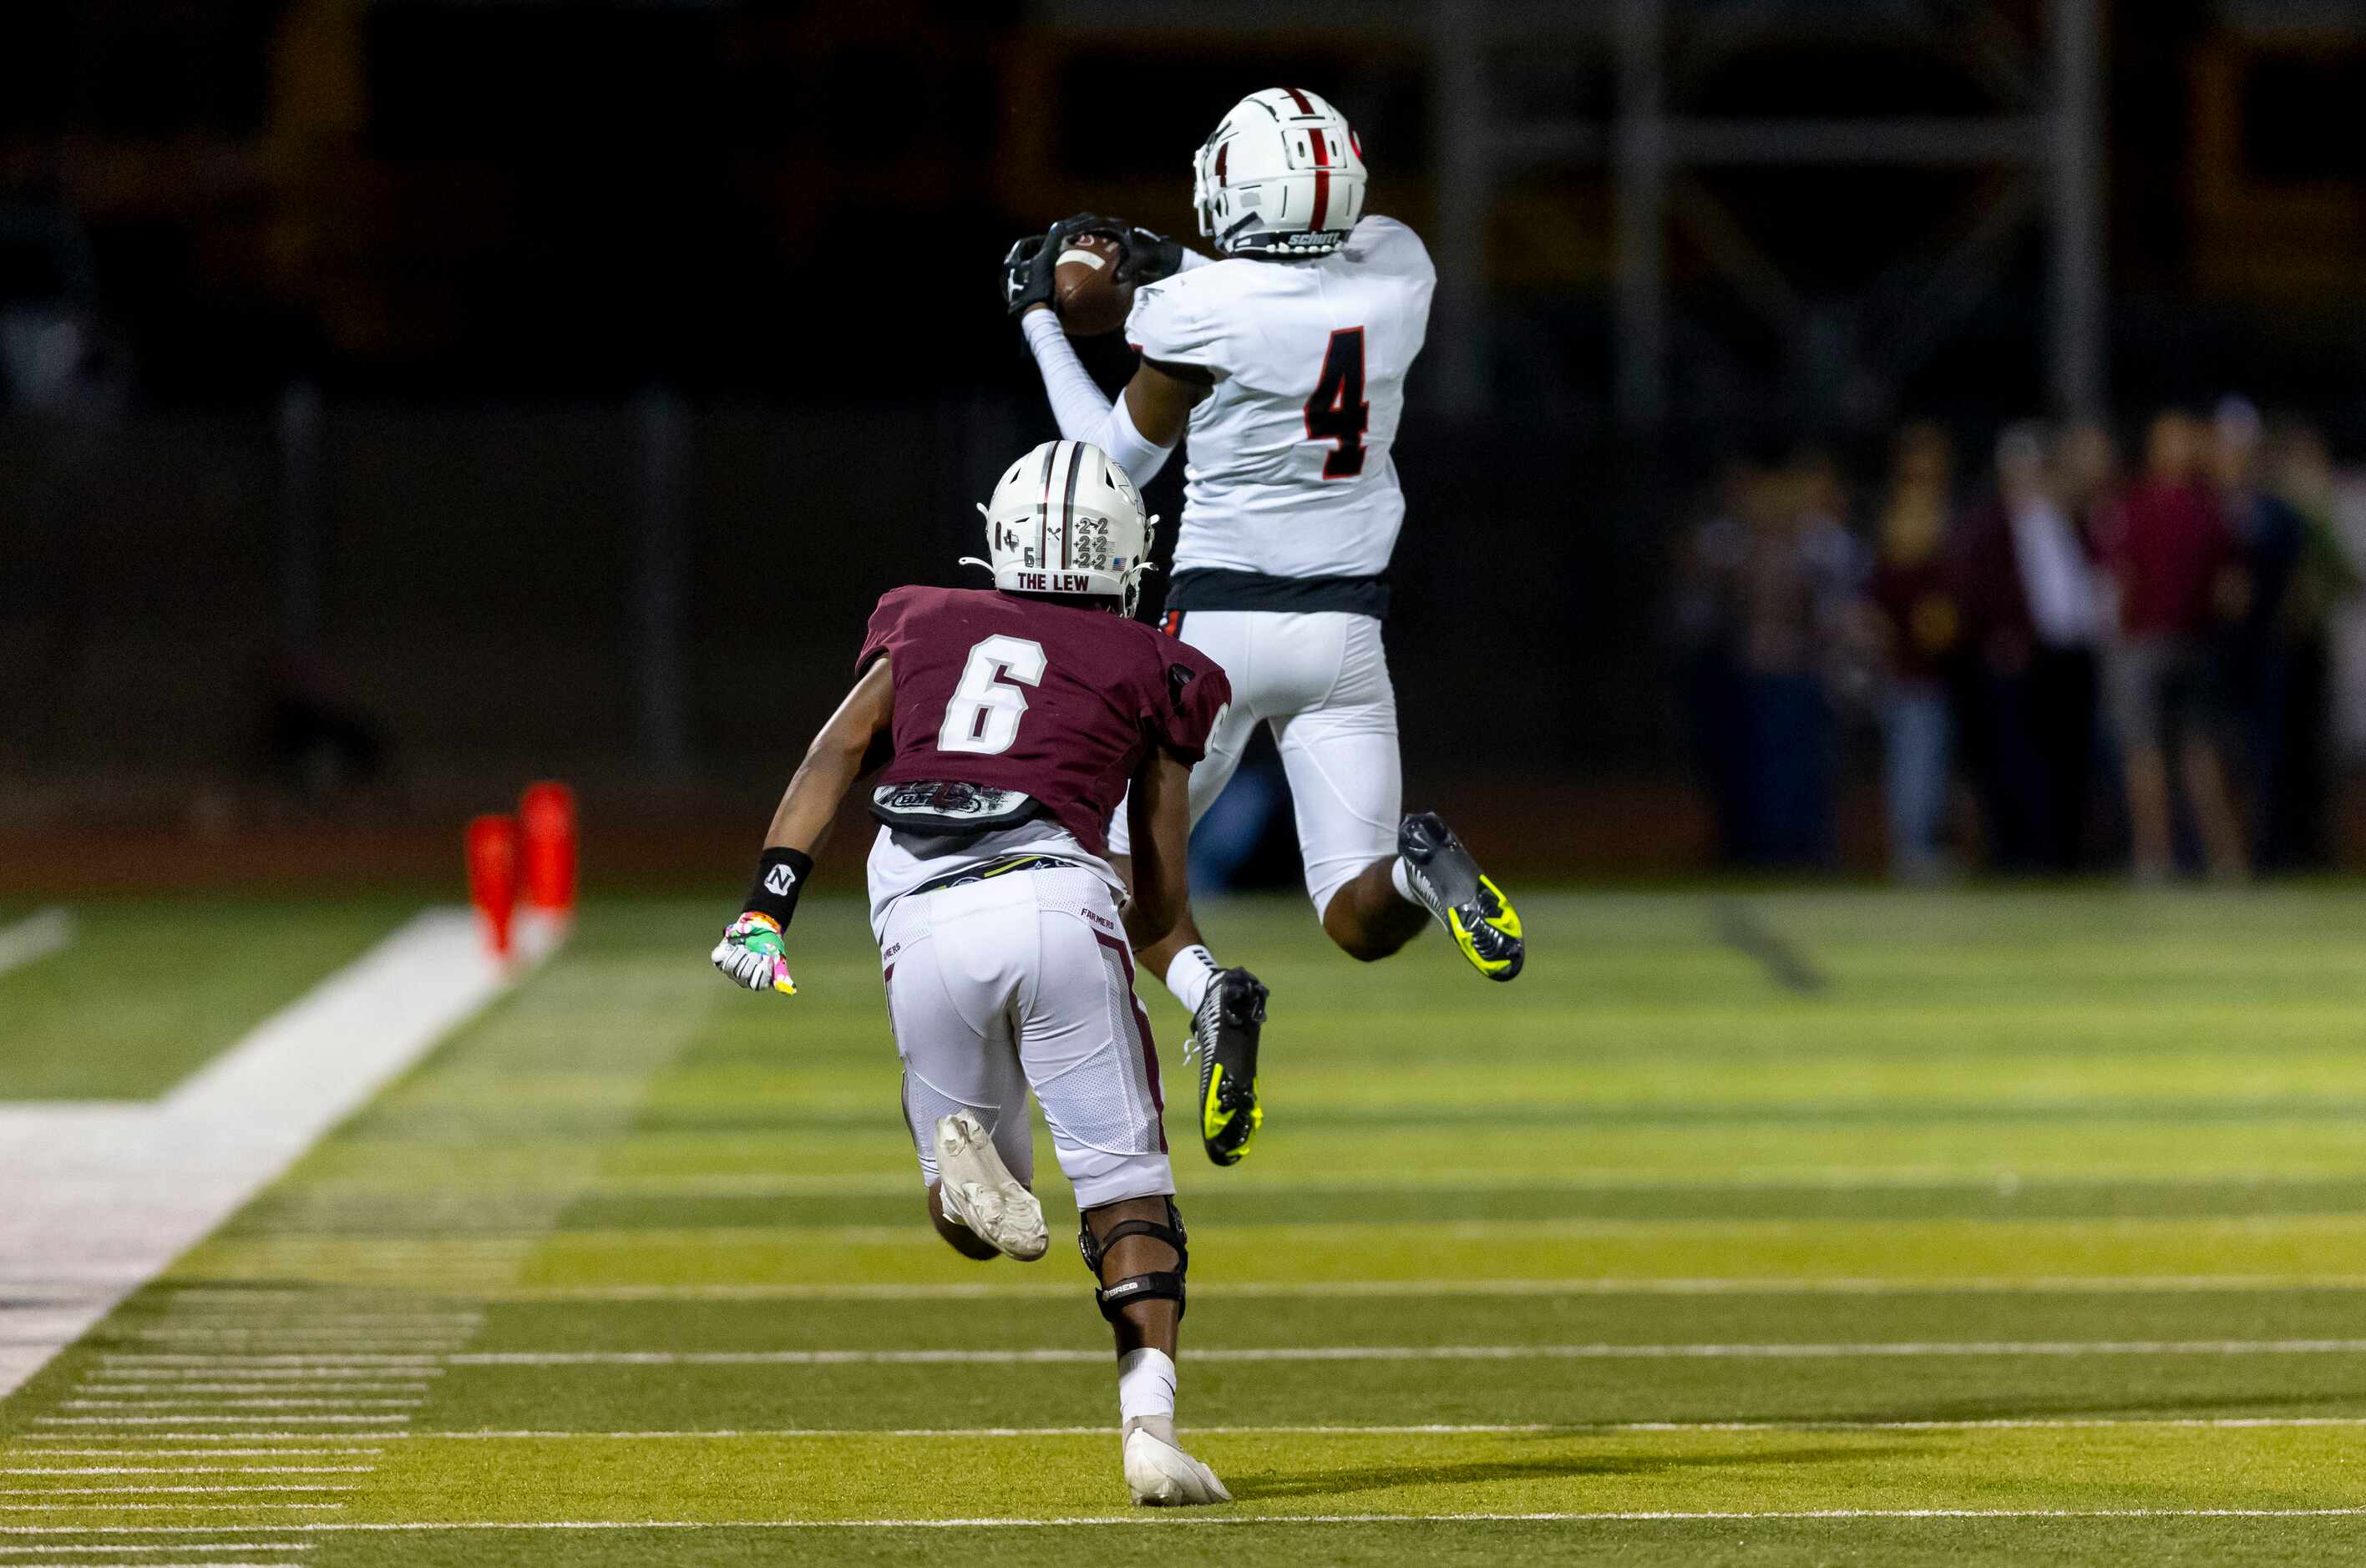 Coppell senior defensive back Braxton Myers (4) intercepts a pass intended for Lewisville...